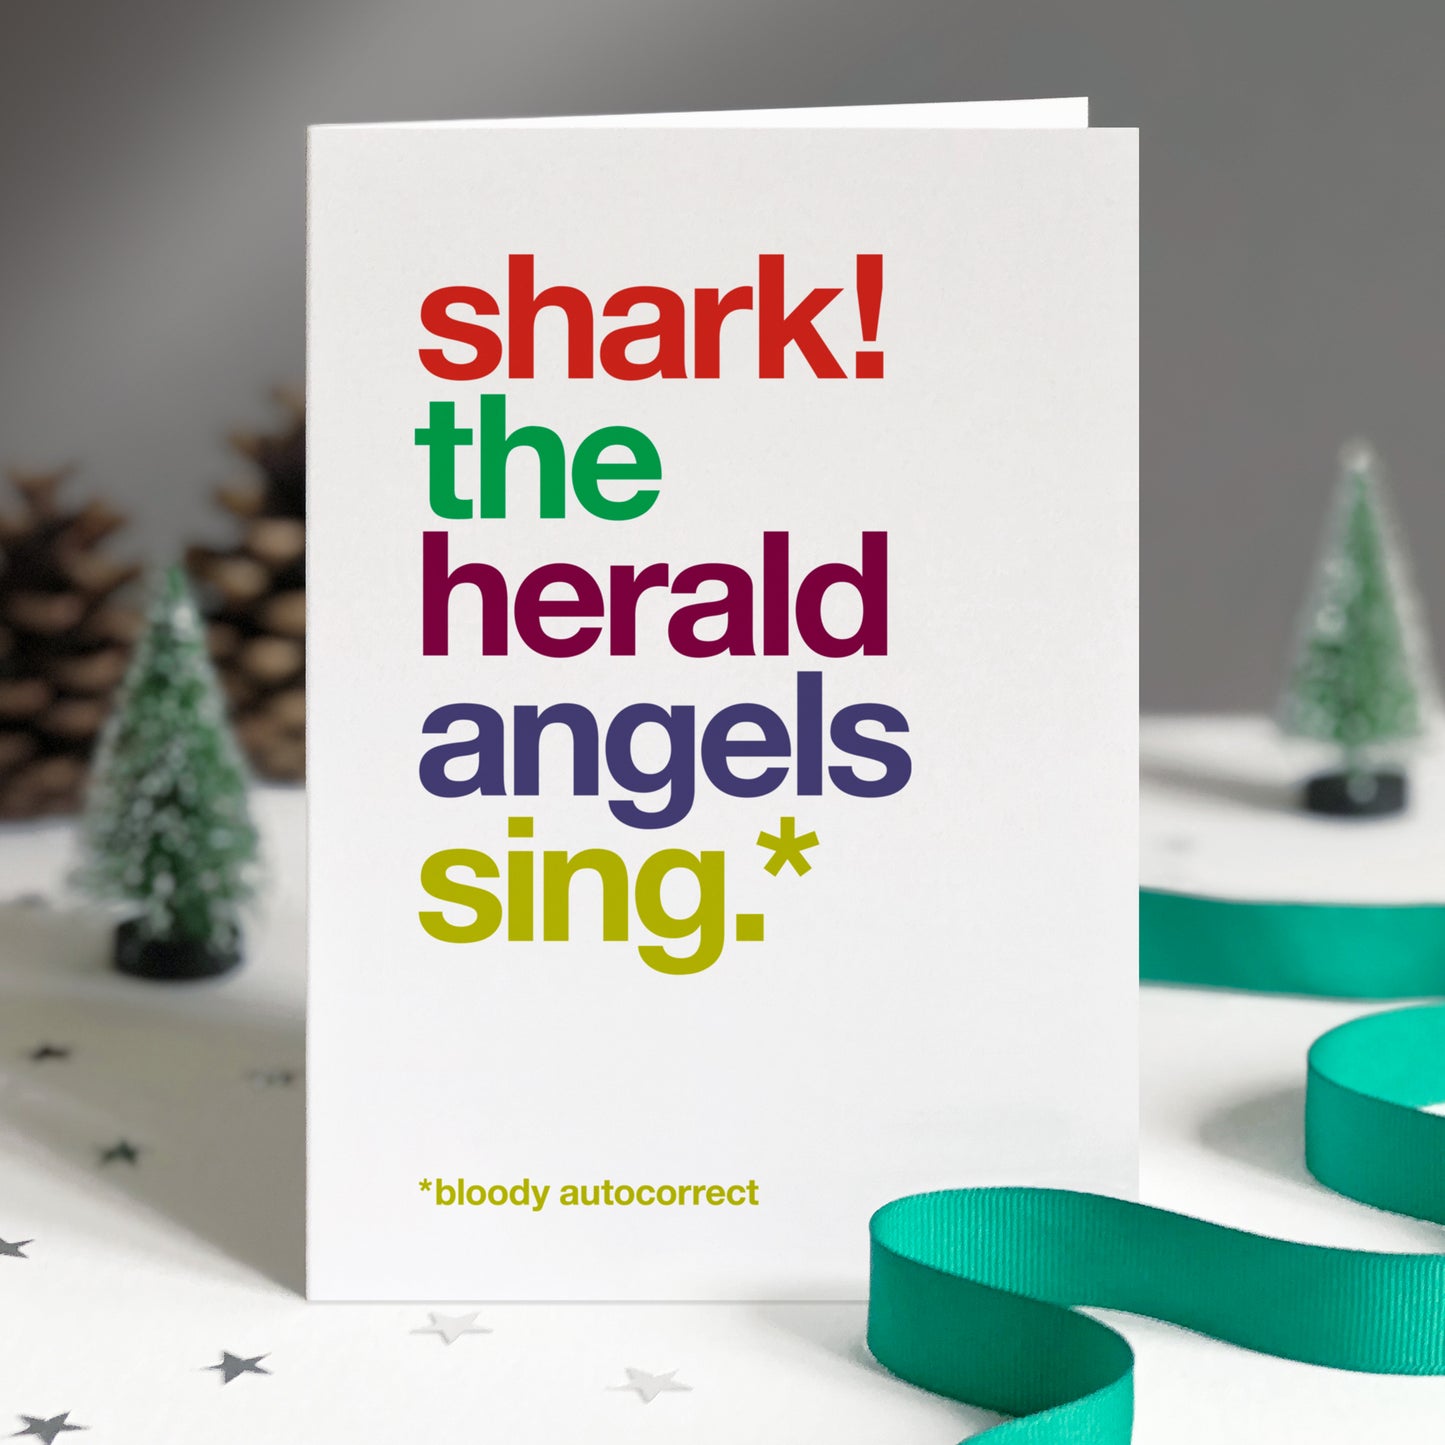 A white card with colourful text saying shark! the herald angels sing.* *bloody autocorrect